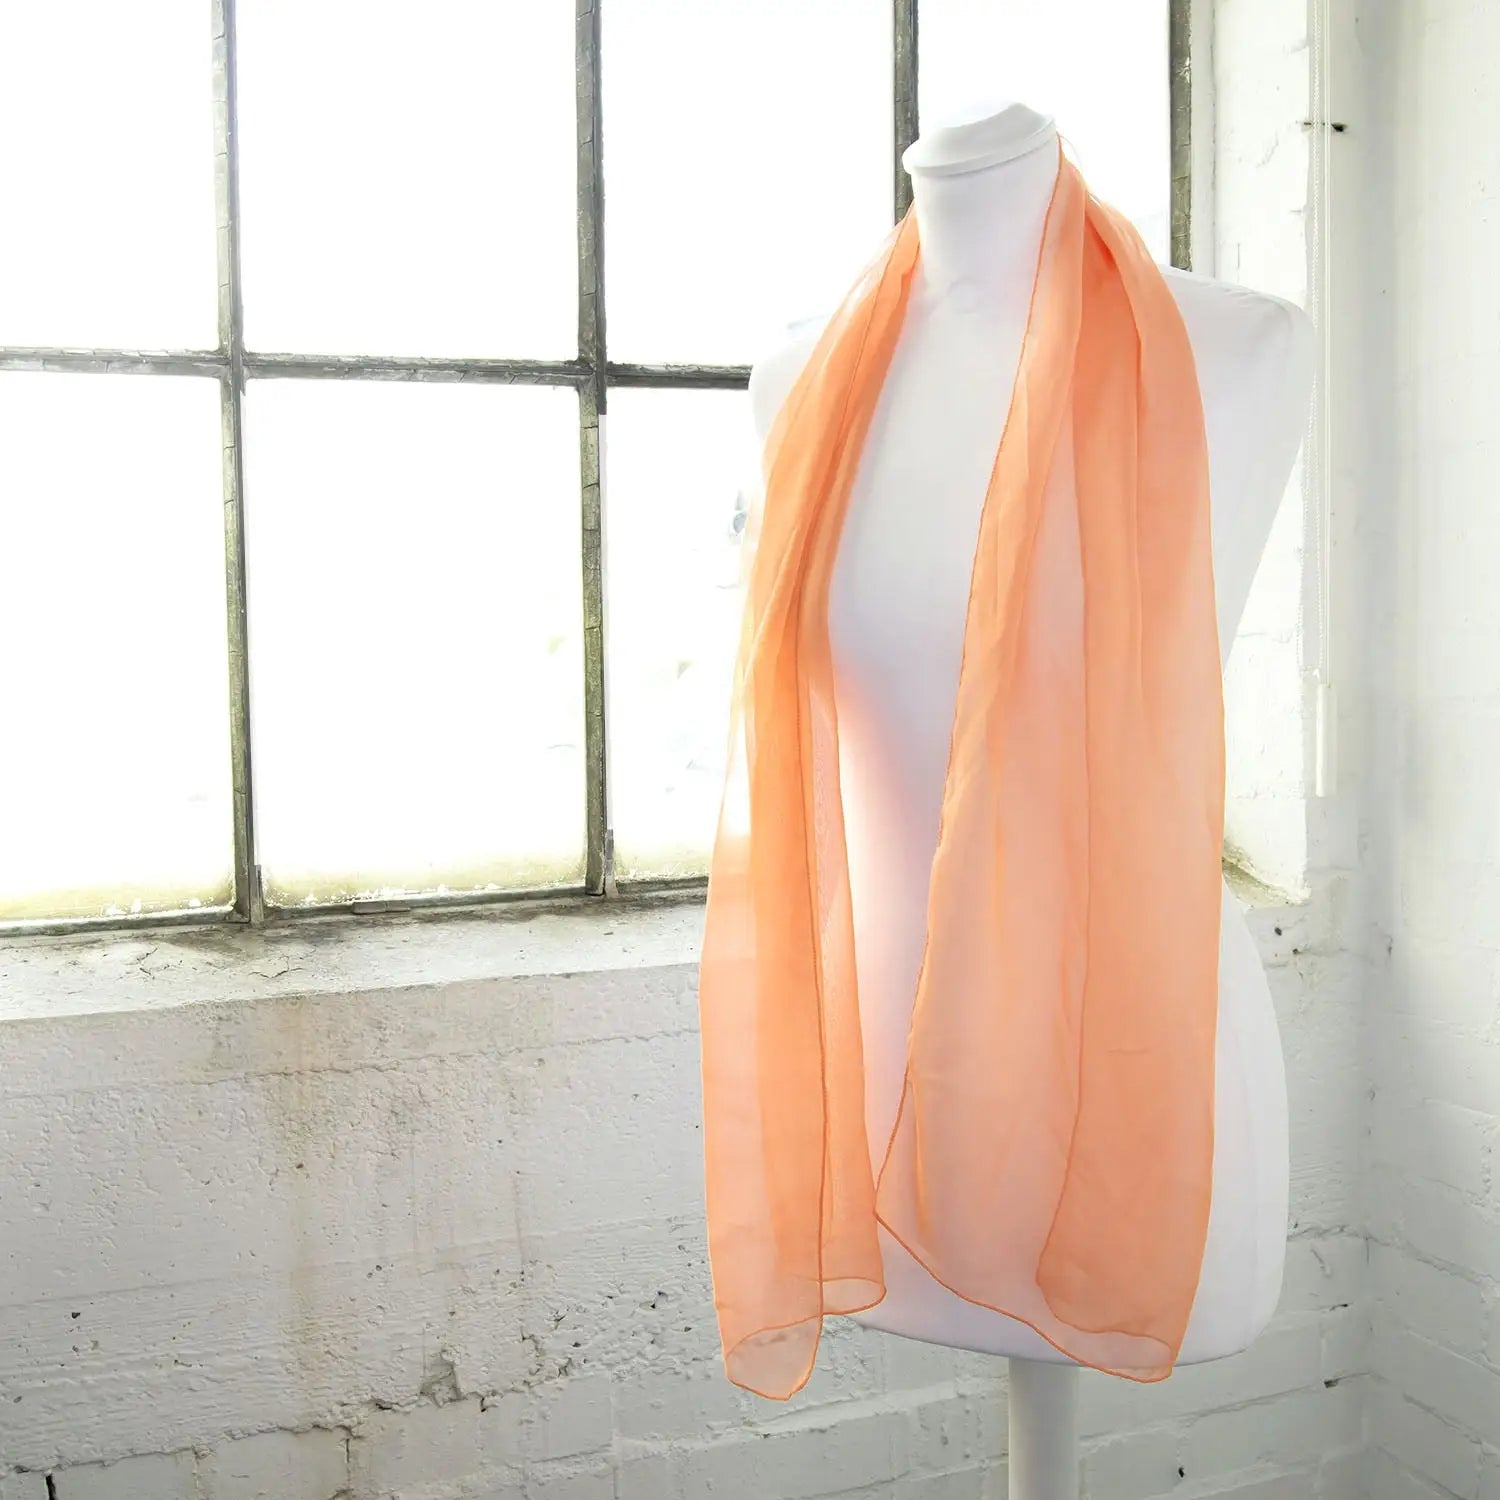 Luxurious Lightweight Chiffon Scarf: Classic Plain Design mannequin with scarf in front of window